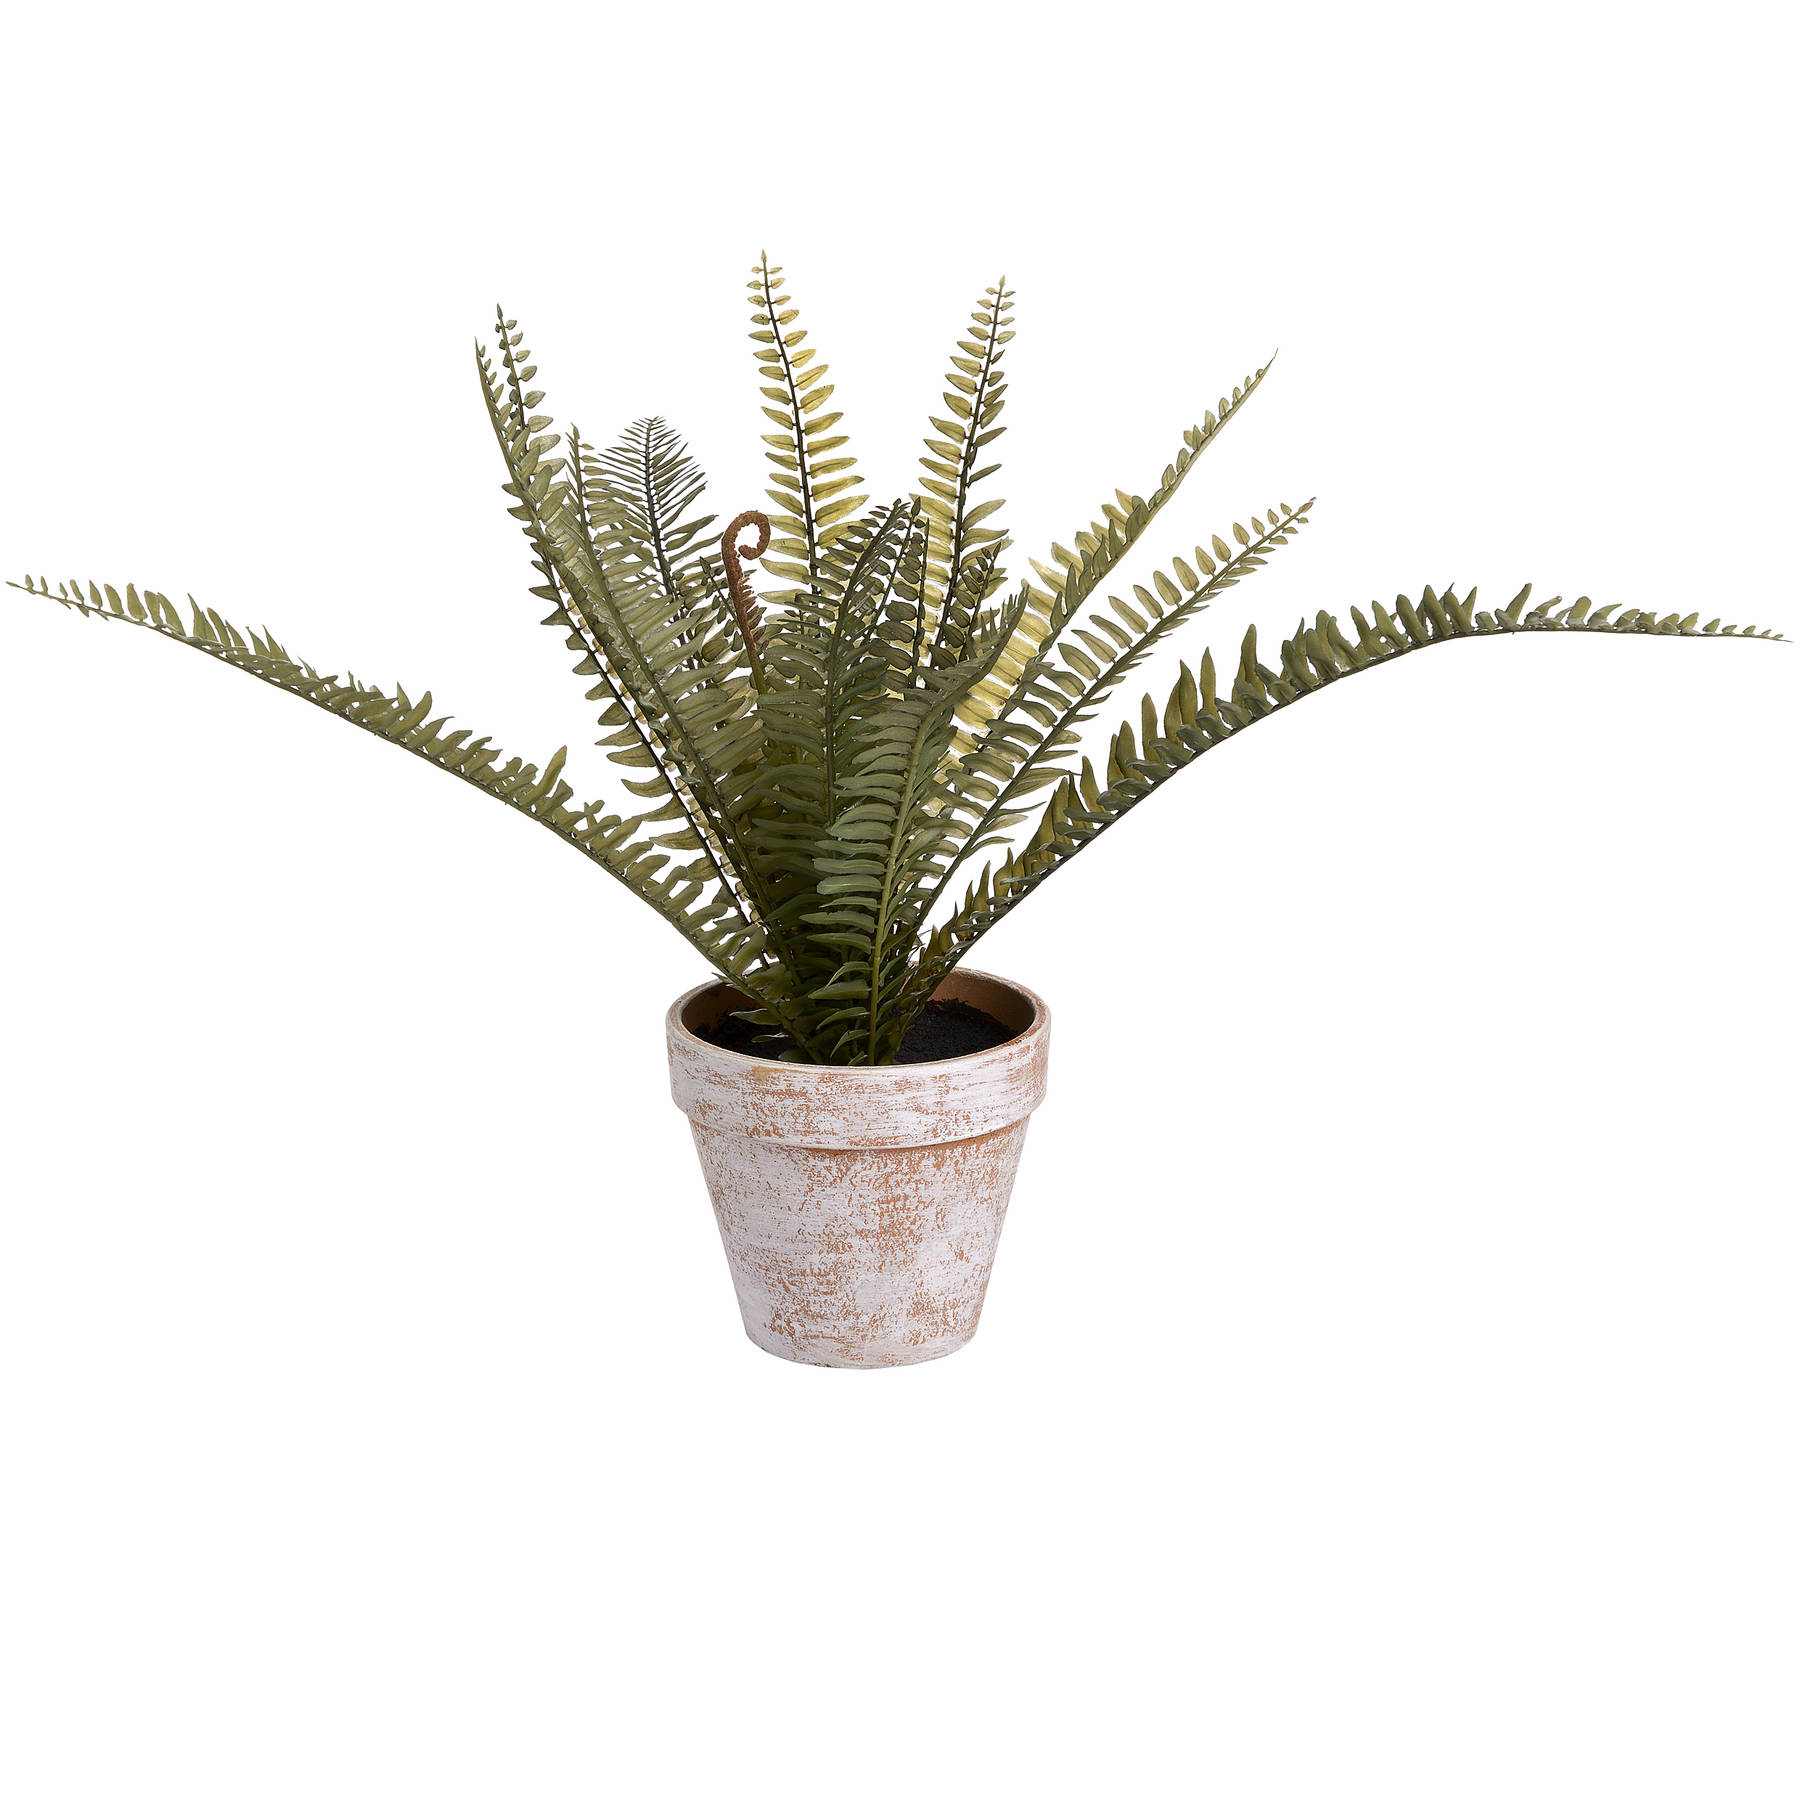 Potted Fern - Image 4